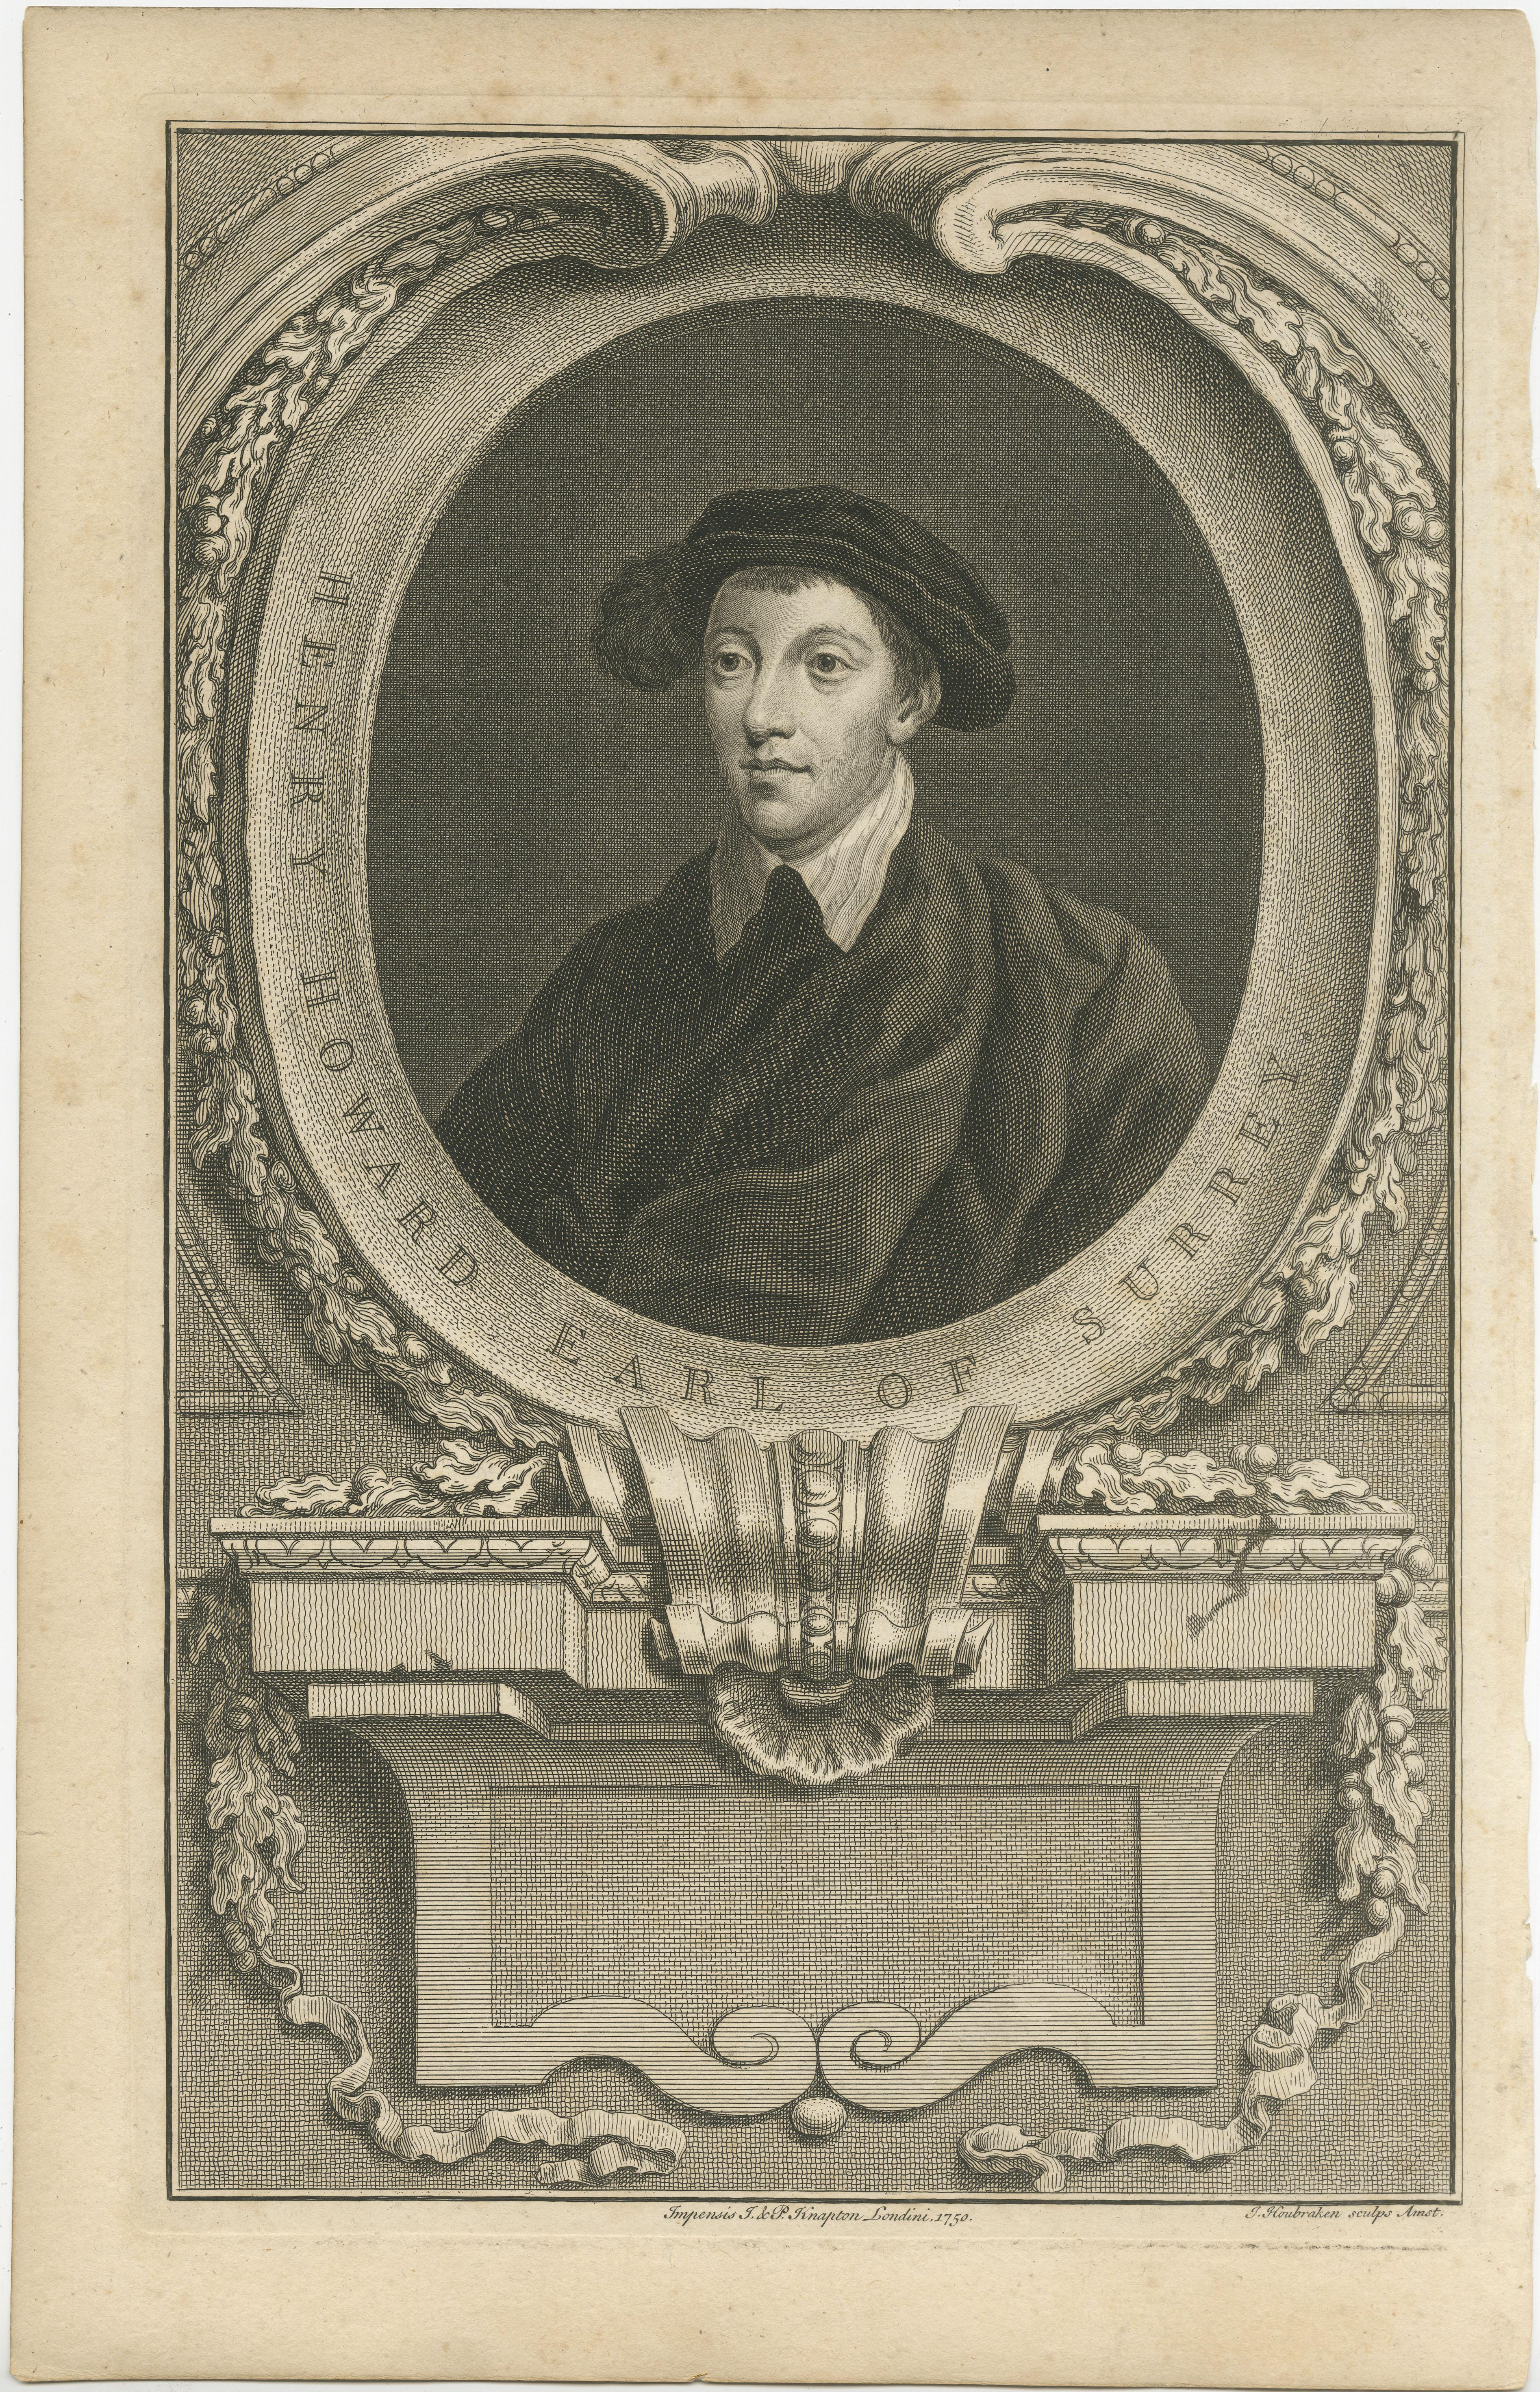 Antique portrait titled 'Henry Howard Earl of Surrey'. Henry Howard, Earl of Surrey (1516/1517 – 19 January 1547), KG, was an English nobleman, politician and poet. He was one of the founders of English Renaissance poetry and was the last known